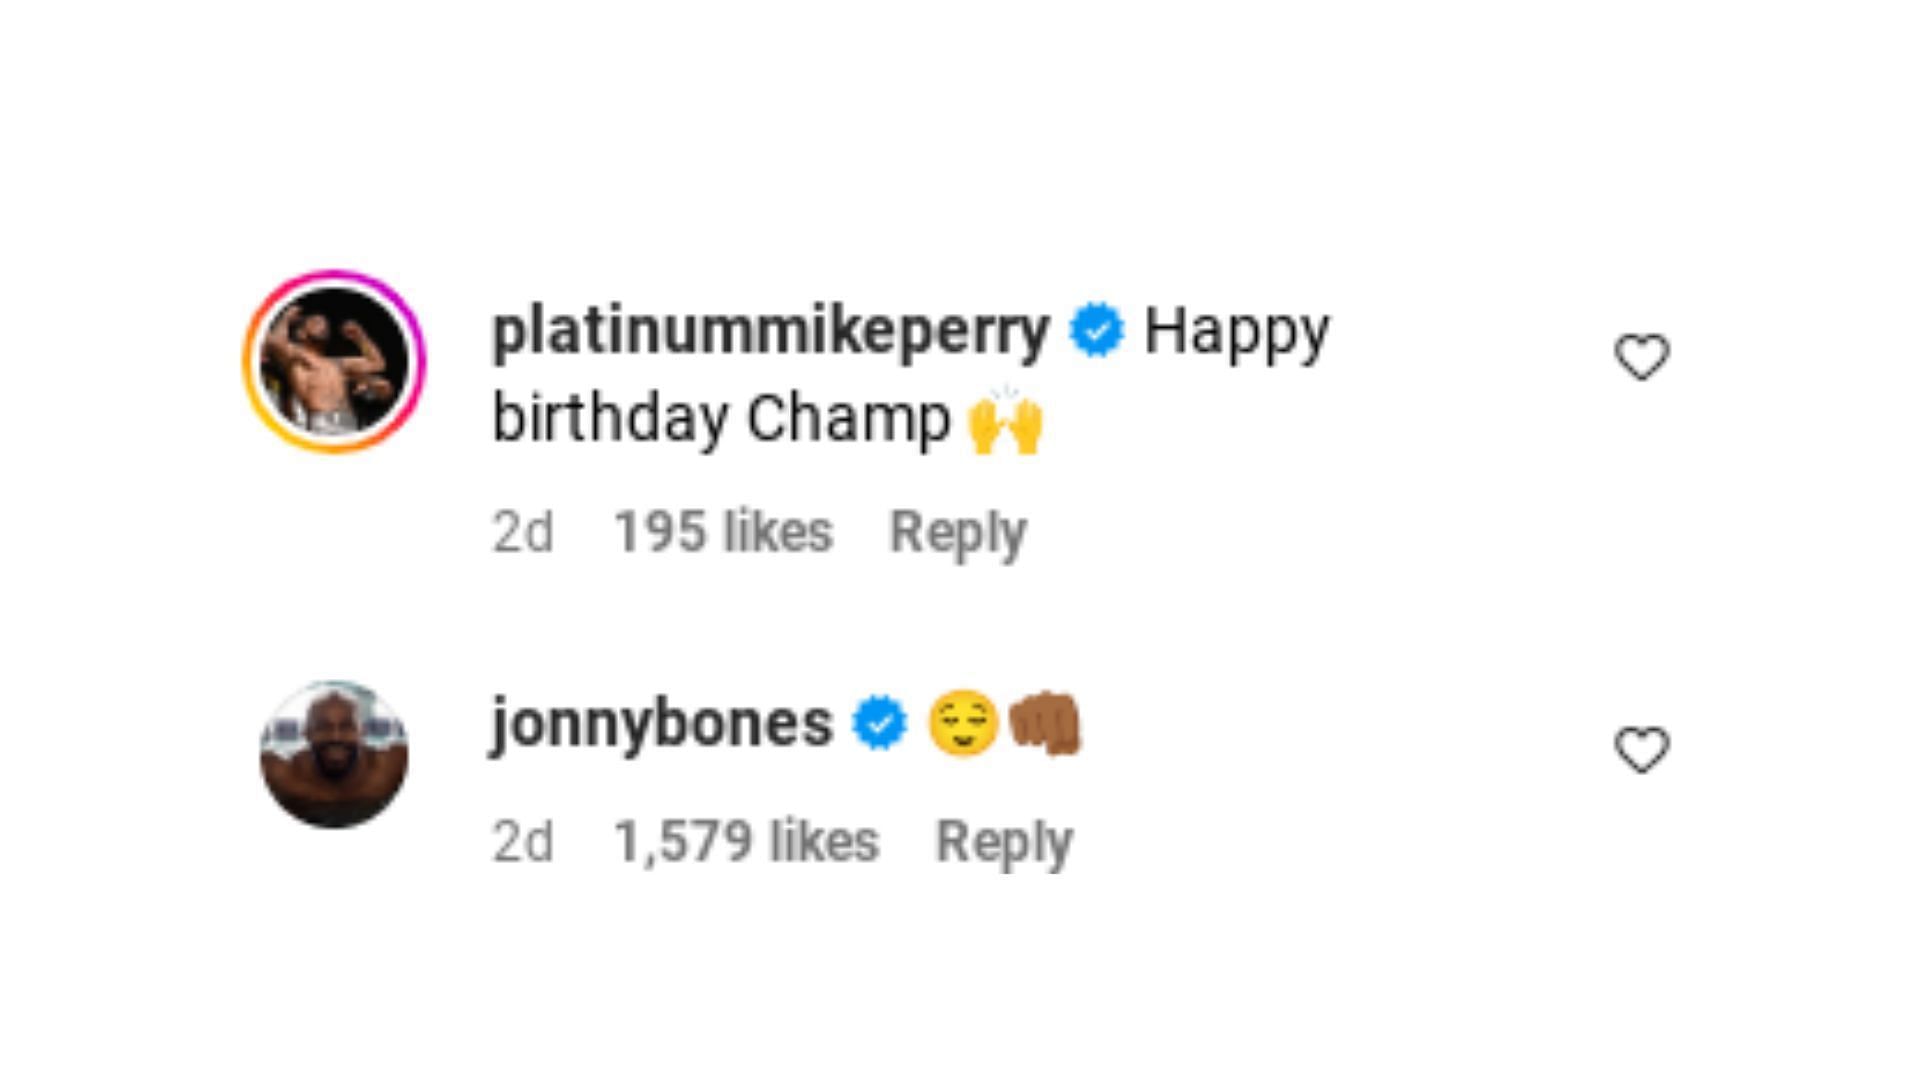 Comments by Jon Jones and Mike Perry